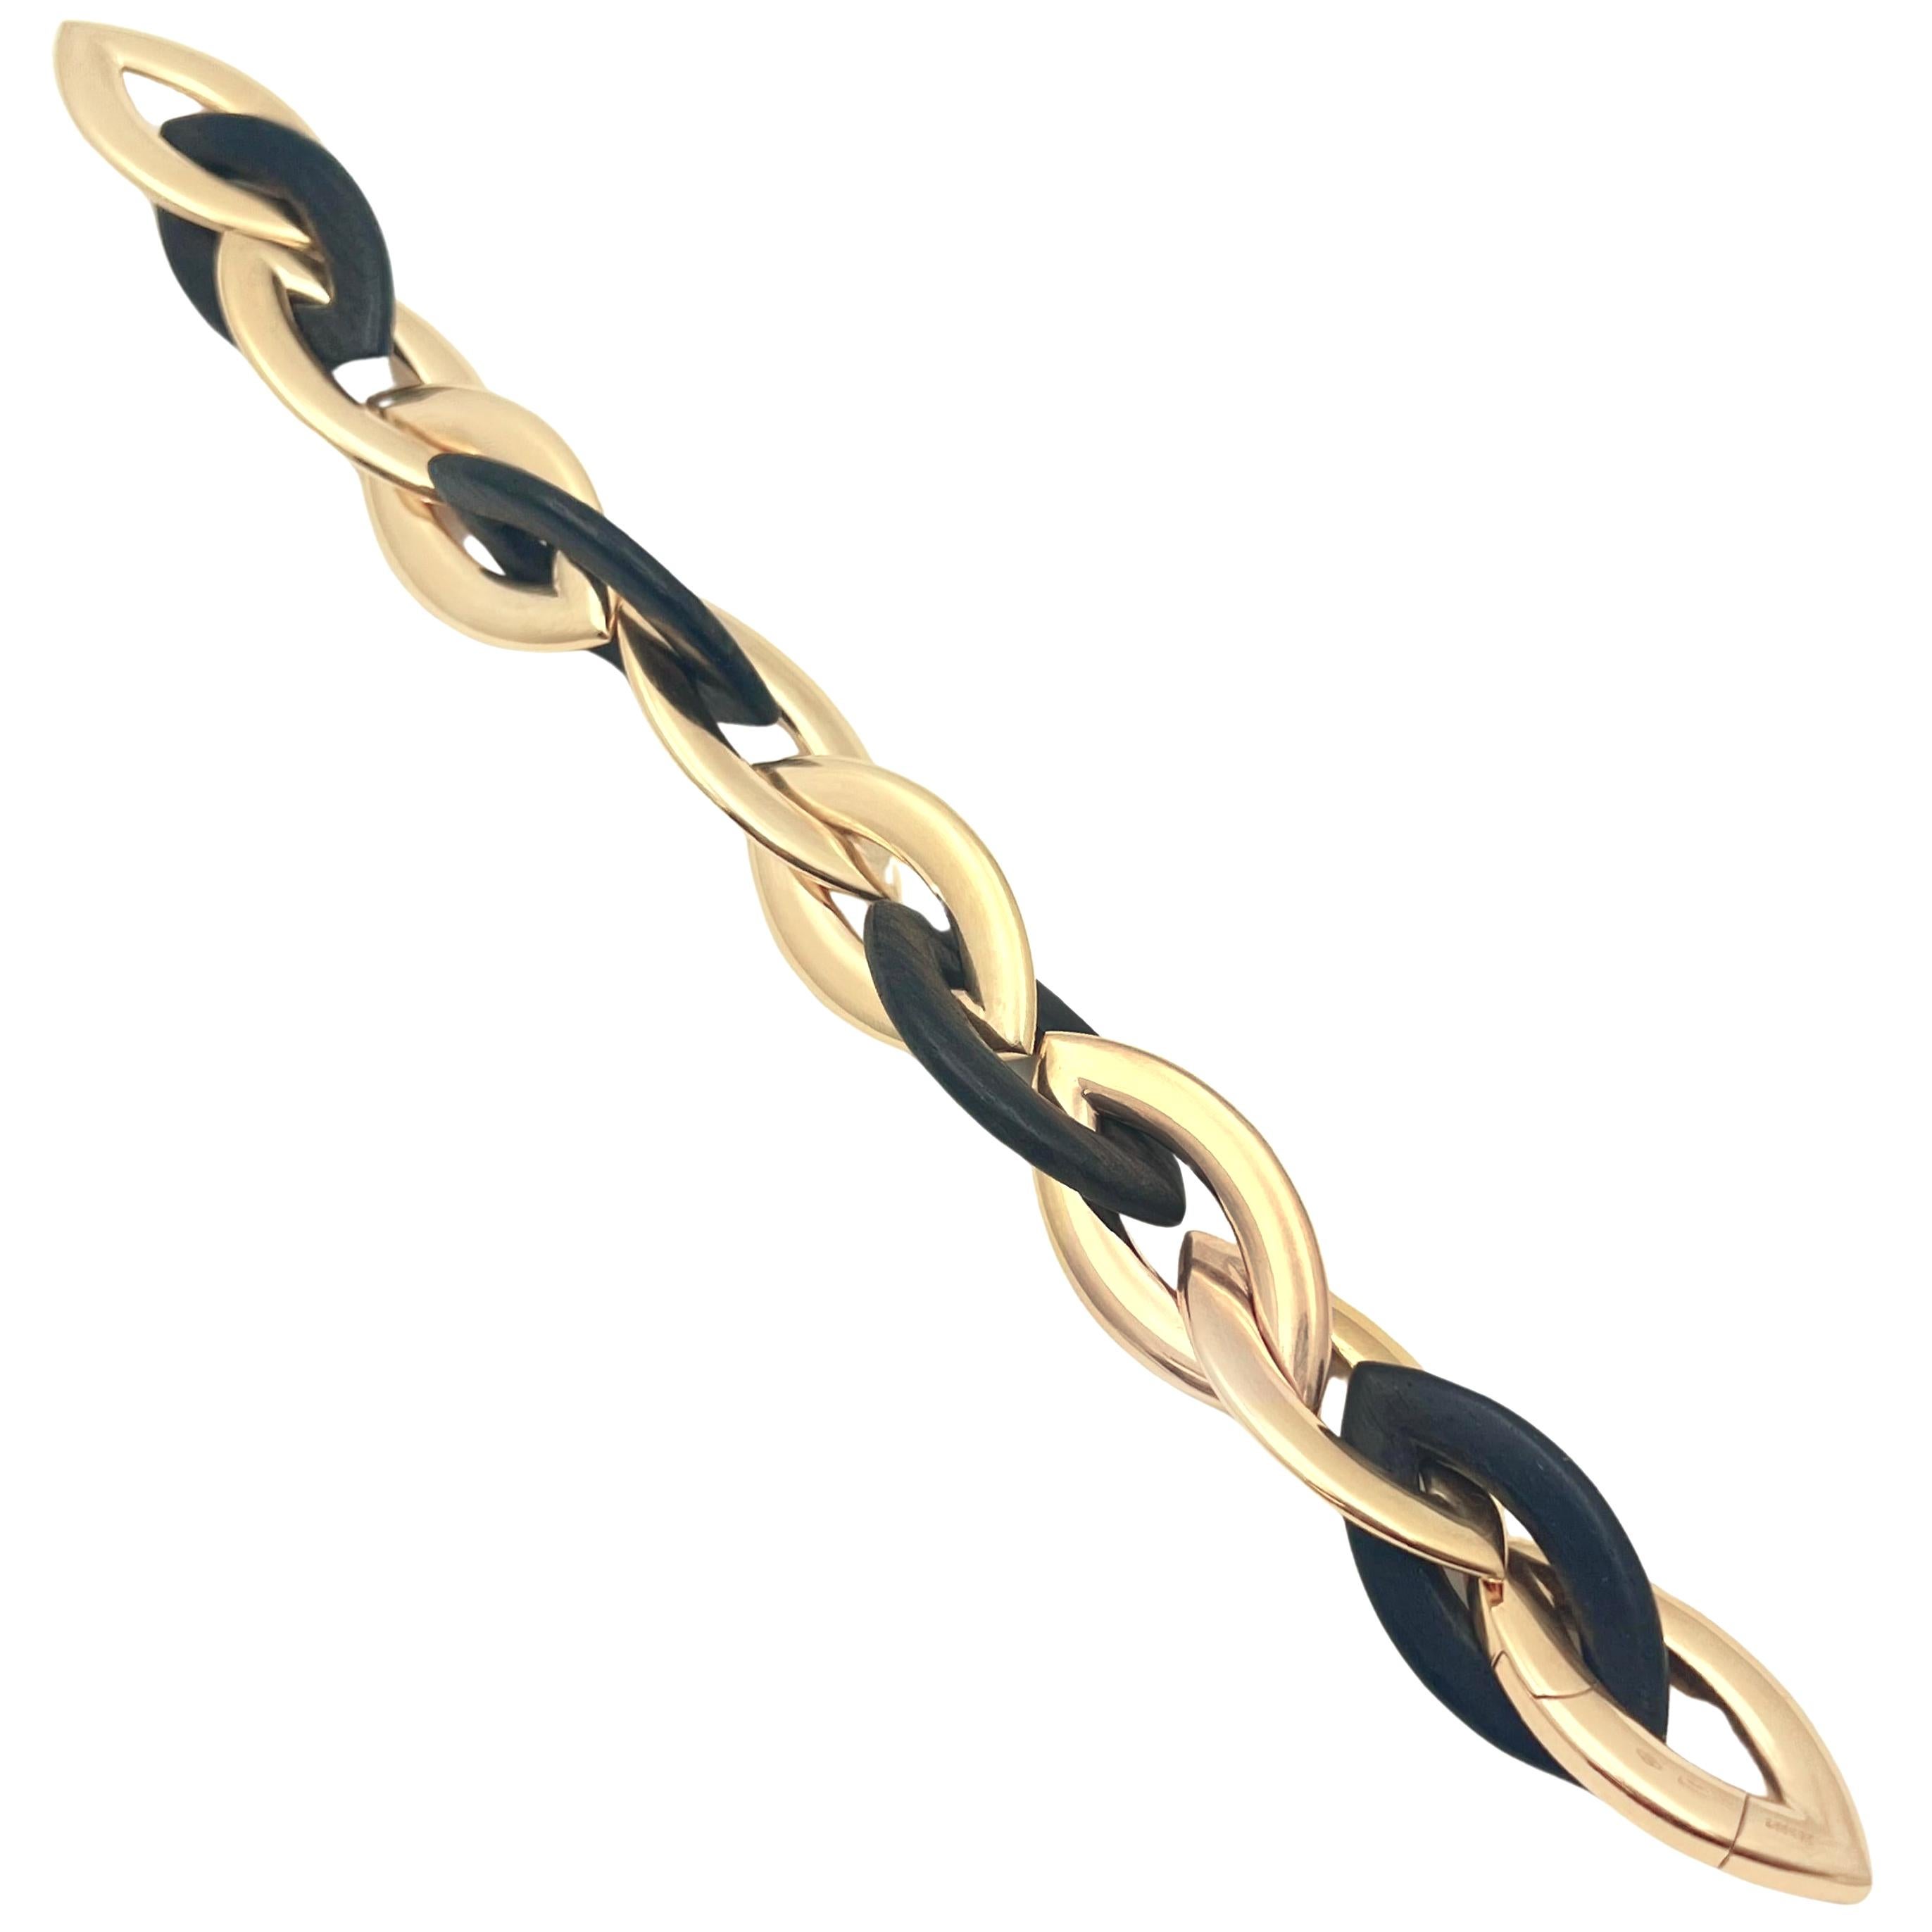 Vhernier Doppio Senso bracelet, featuring four marquise-shaped carved ebony wood links and eight 18k rose gold polished links.  One link opens as clasp.  Signed 